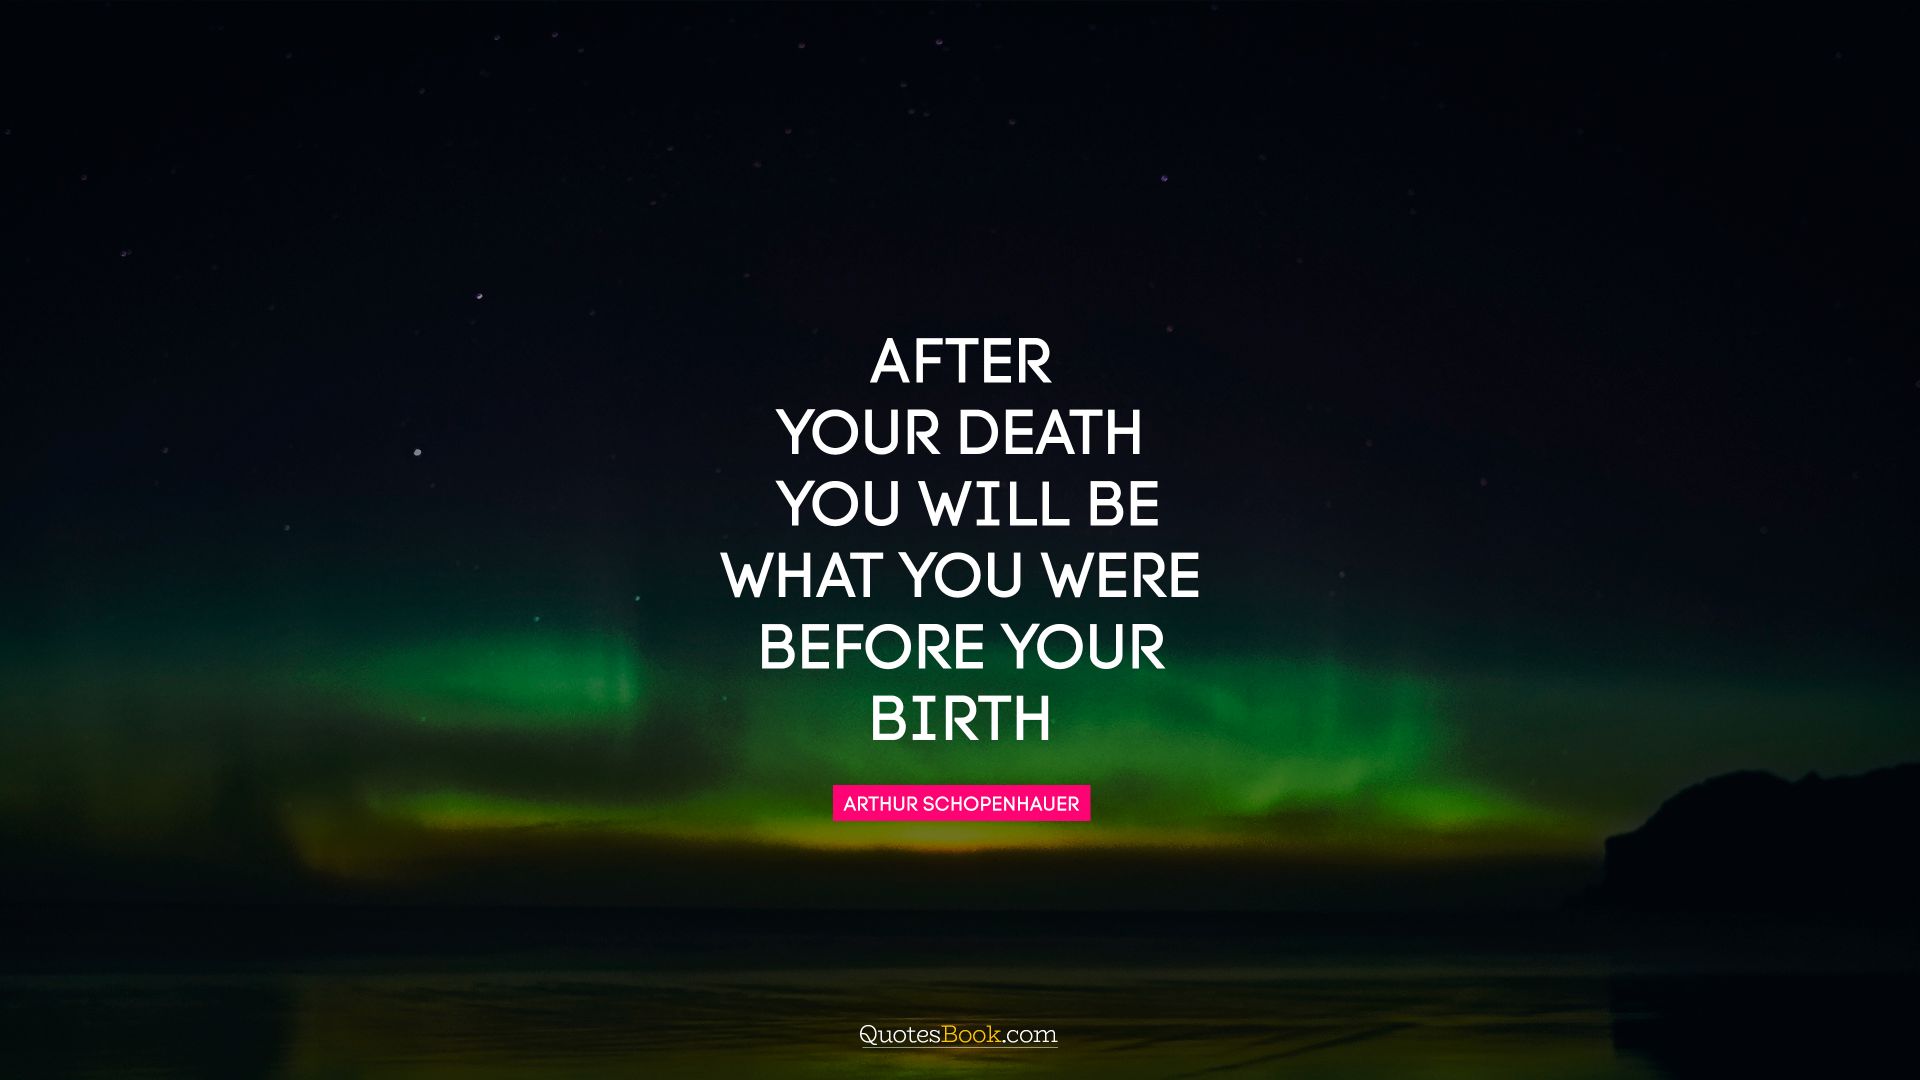 After your death you will be what you were before your birth. - Quote by Arthur Schopenhauer